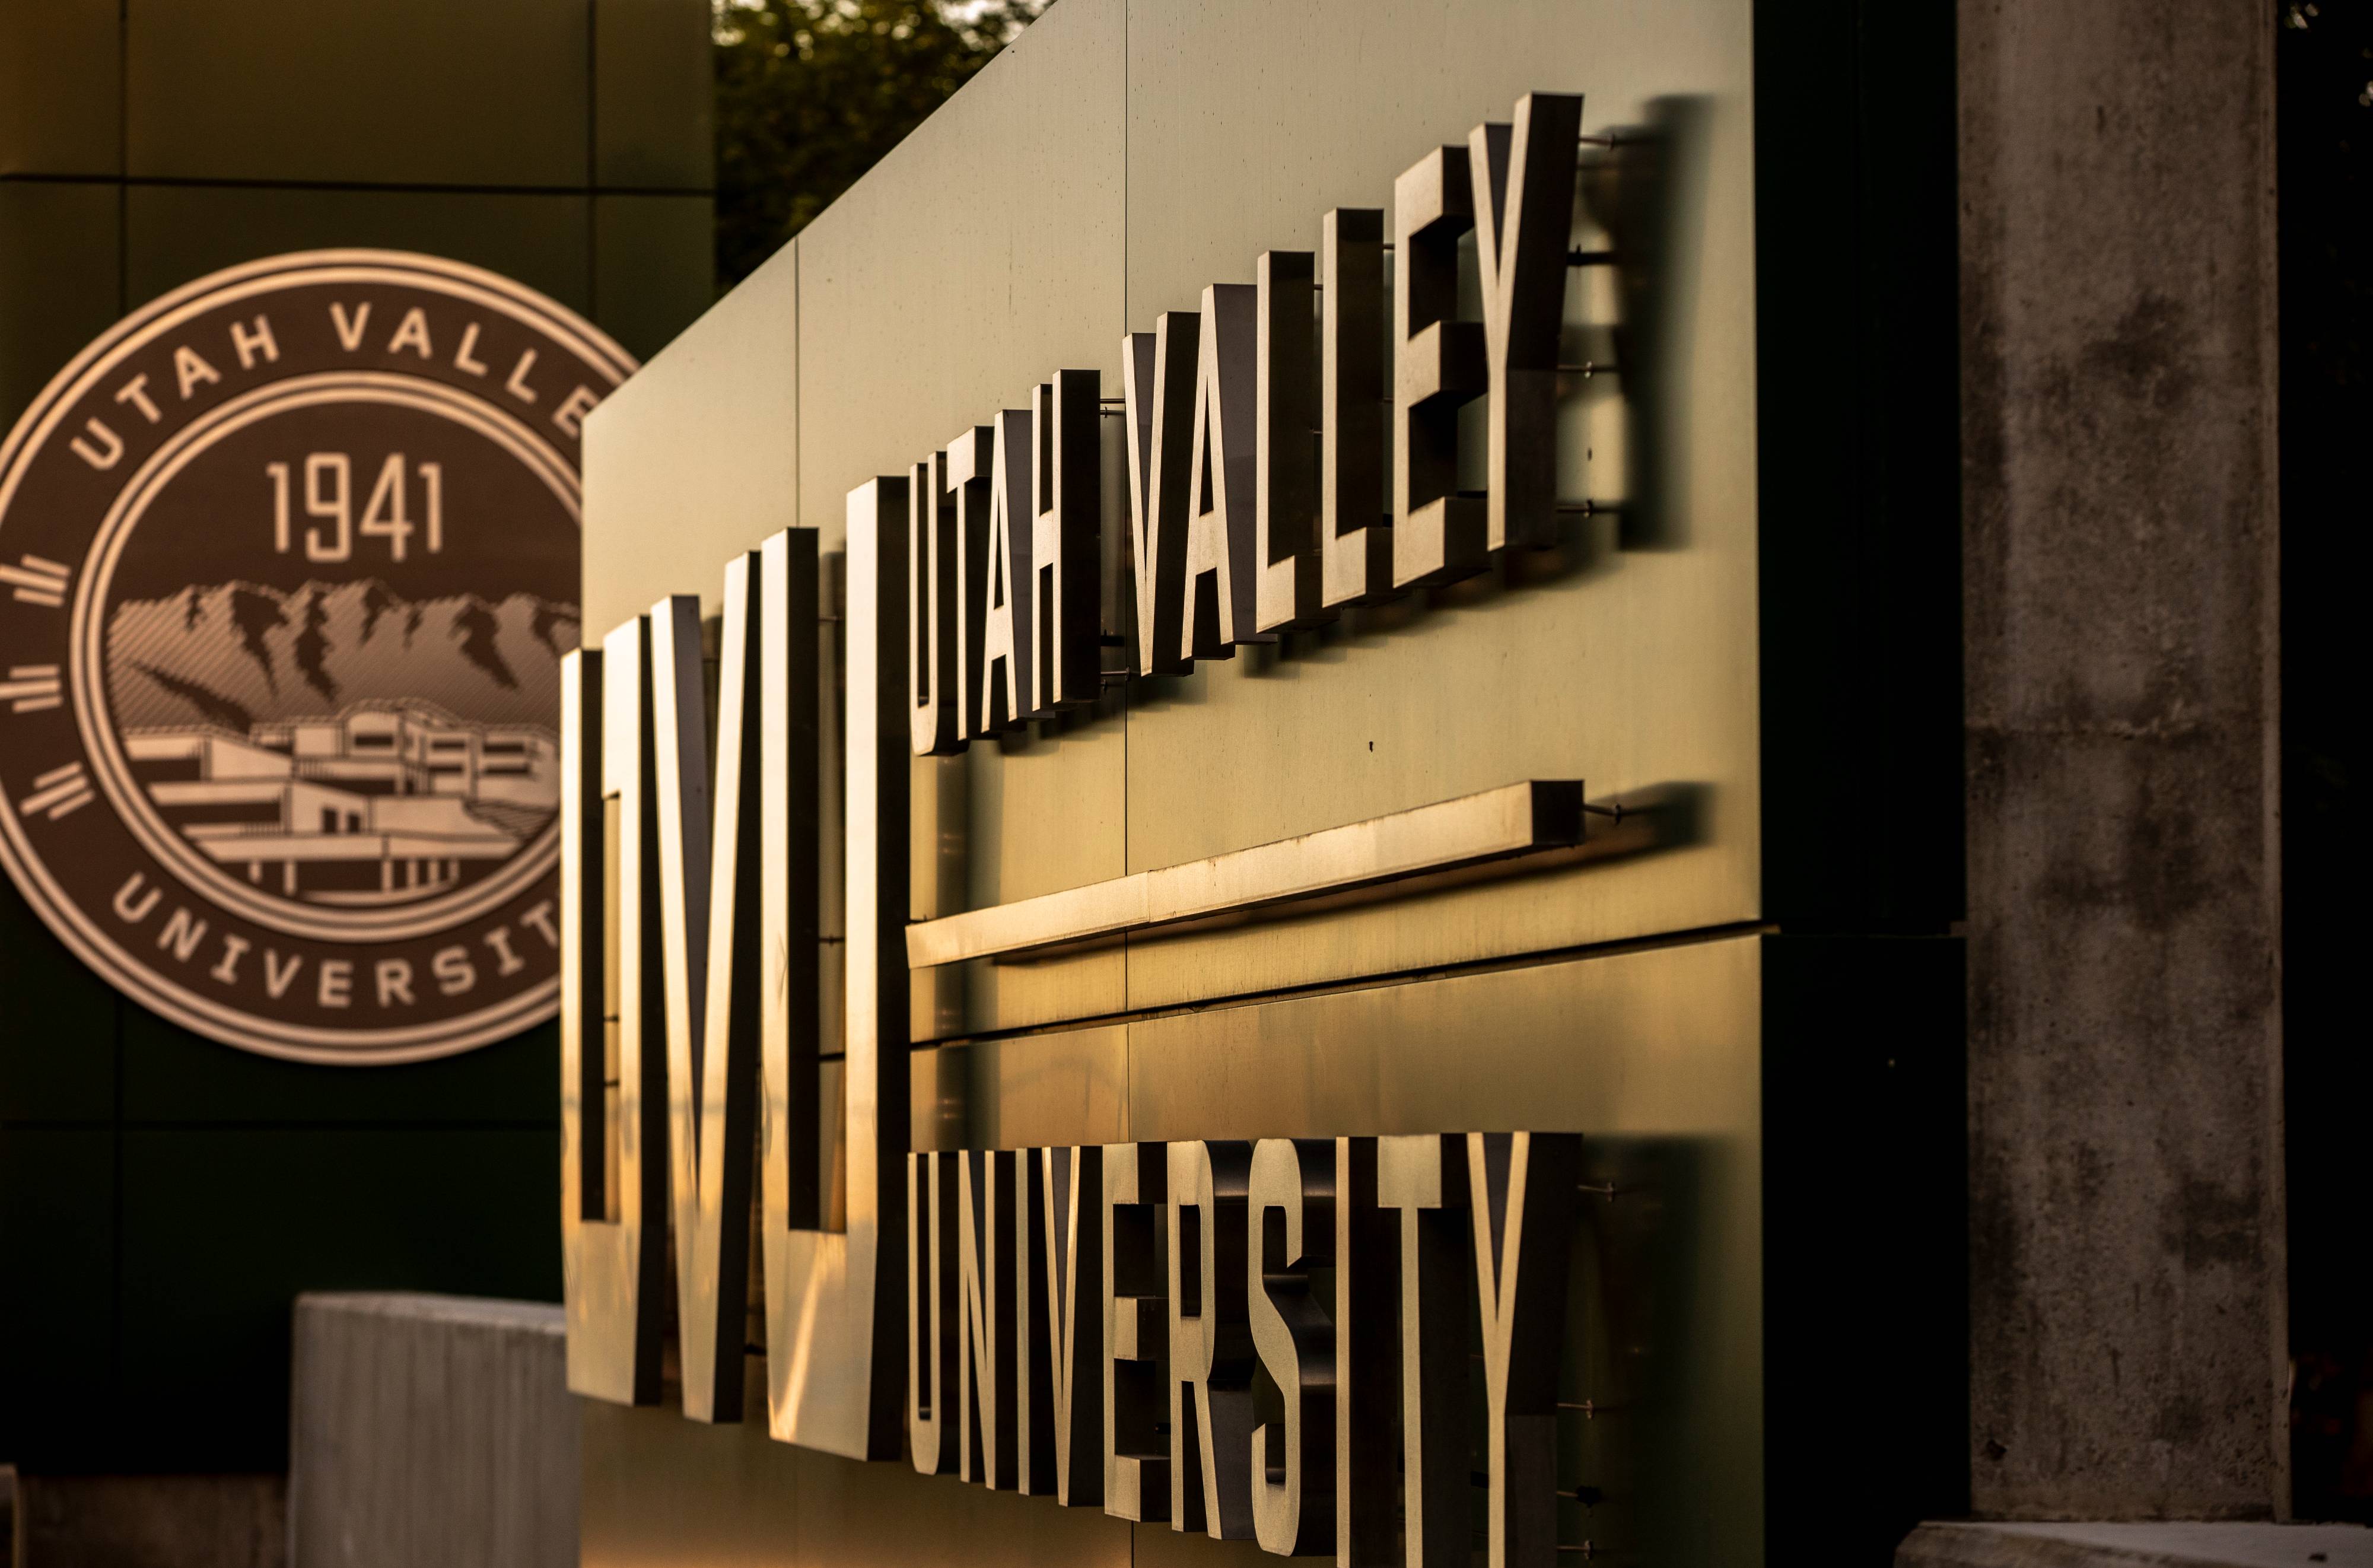 Photo of the front of UVU